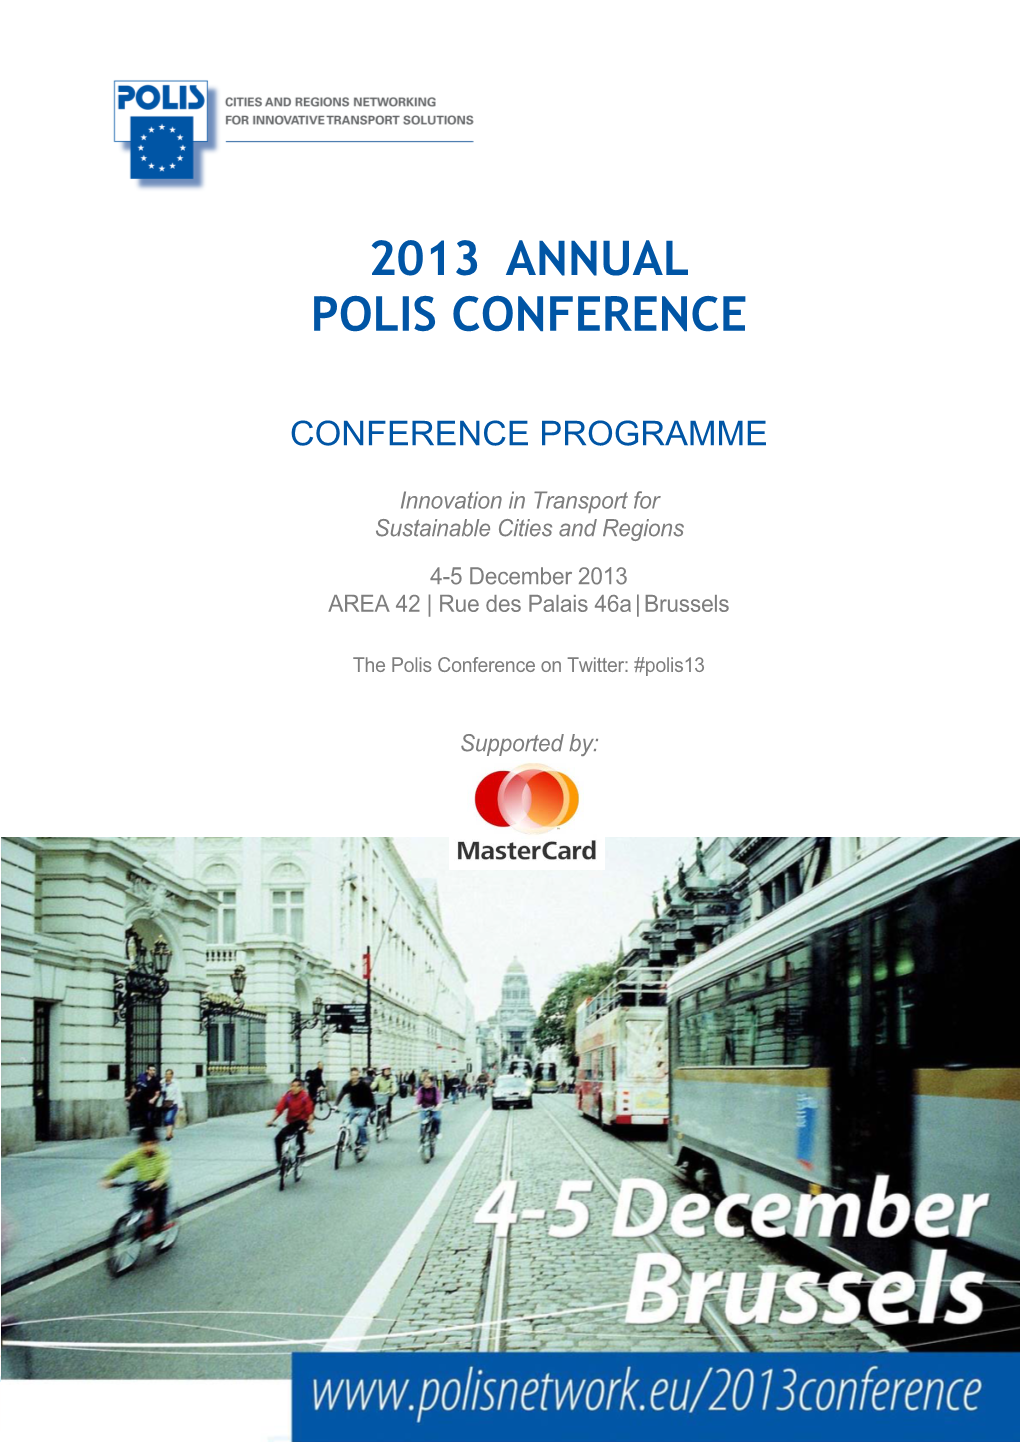 2013 Annual Polis Conference Programme